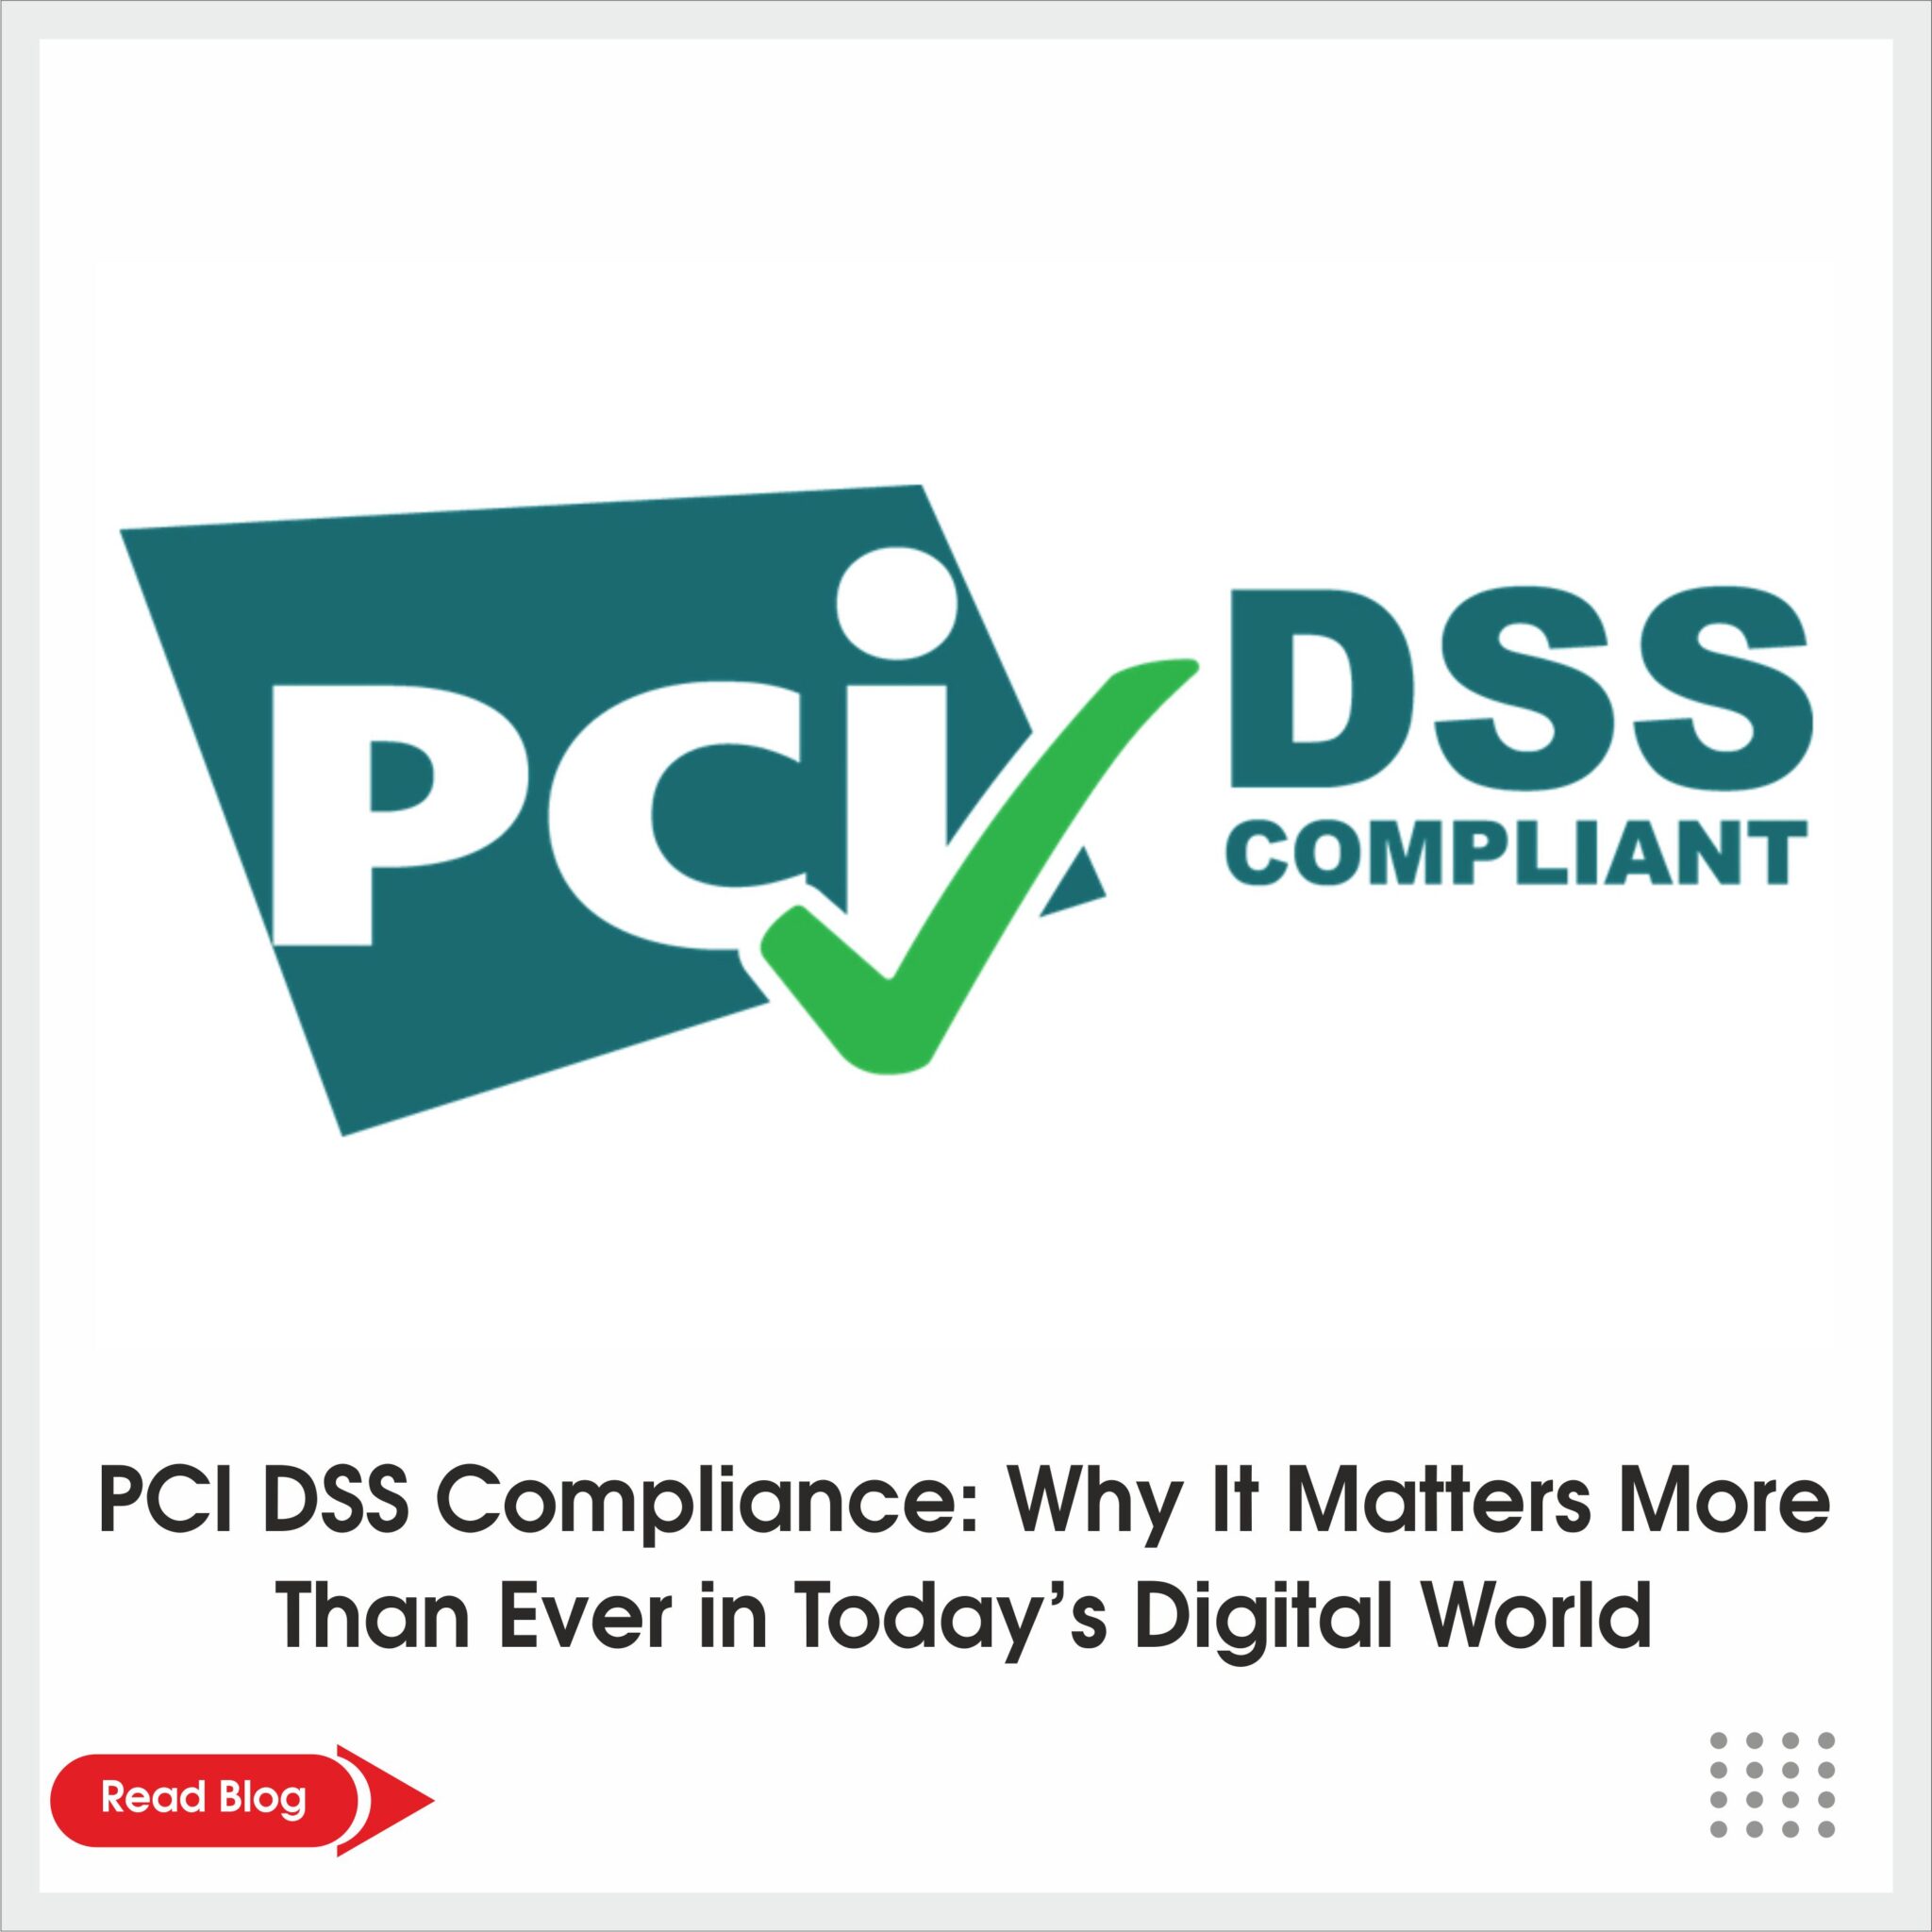 PCI DSS Compliance: Why It Matters More Than Ever in Today’s Digital World